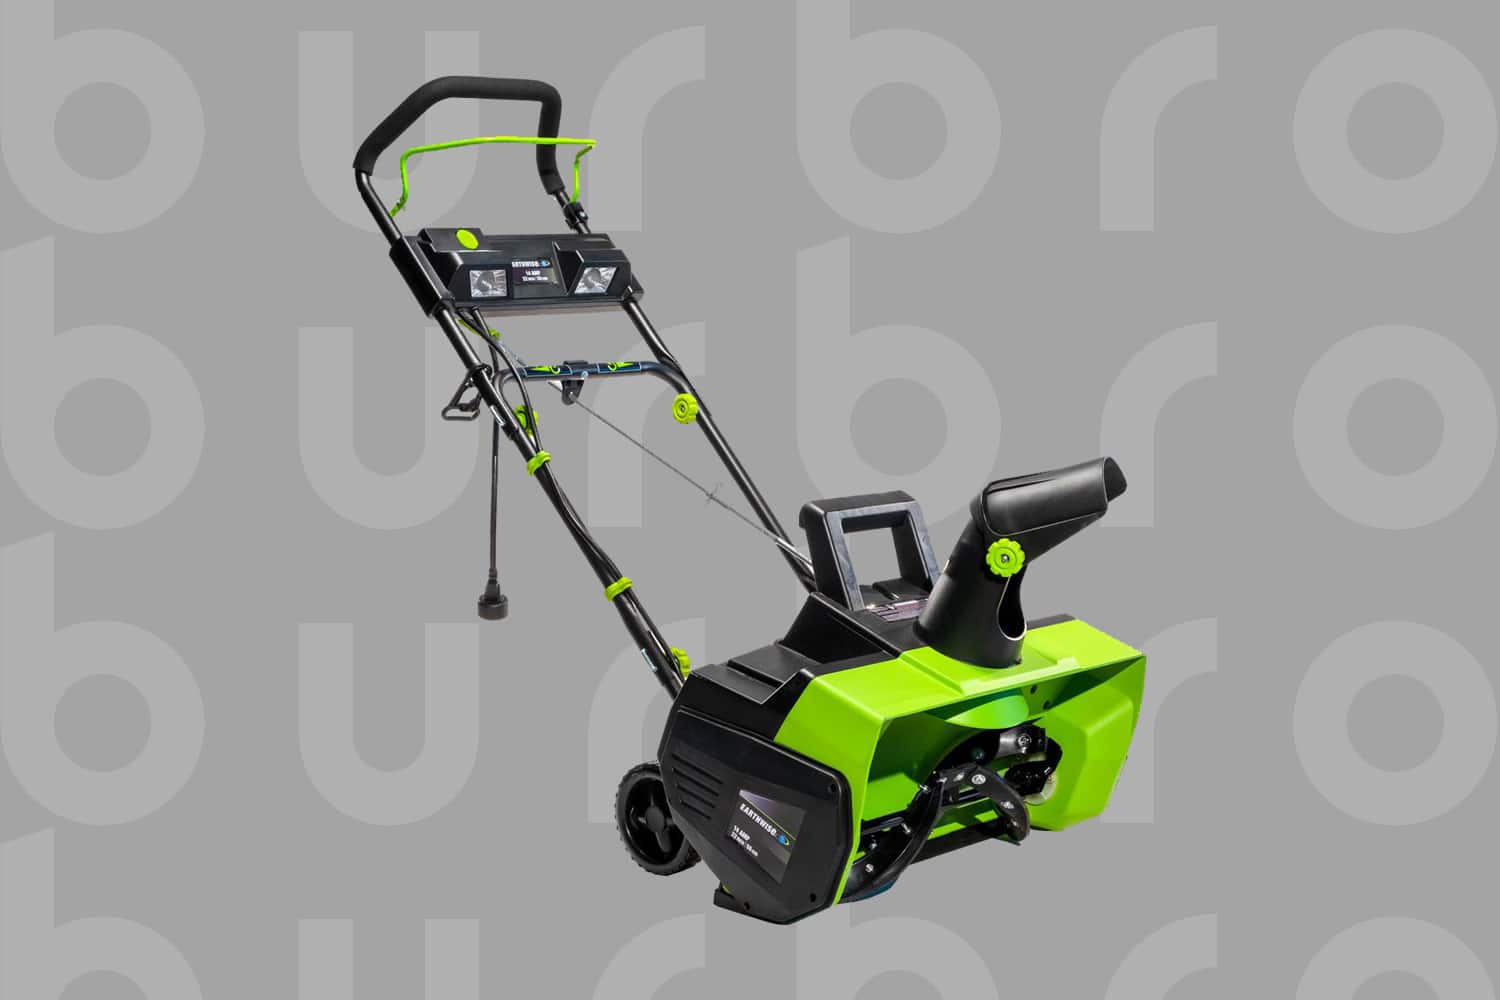 This is the cover photo for our Best Electric Snow Blower article. It shows a lime green and black snowblower overlaid on a grey background with embossed Burbro logo.